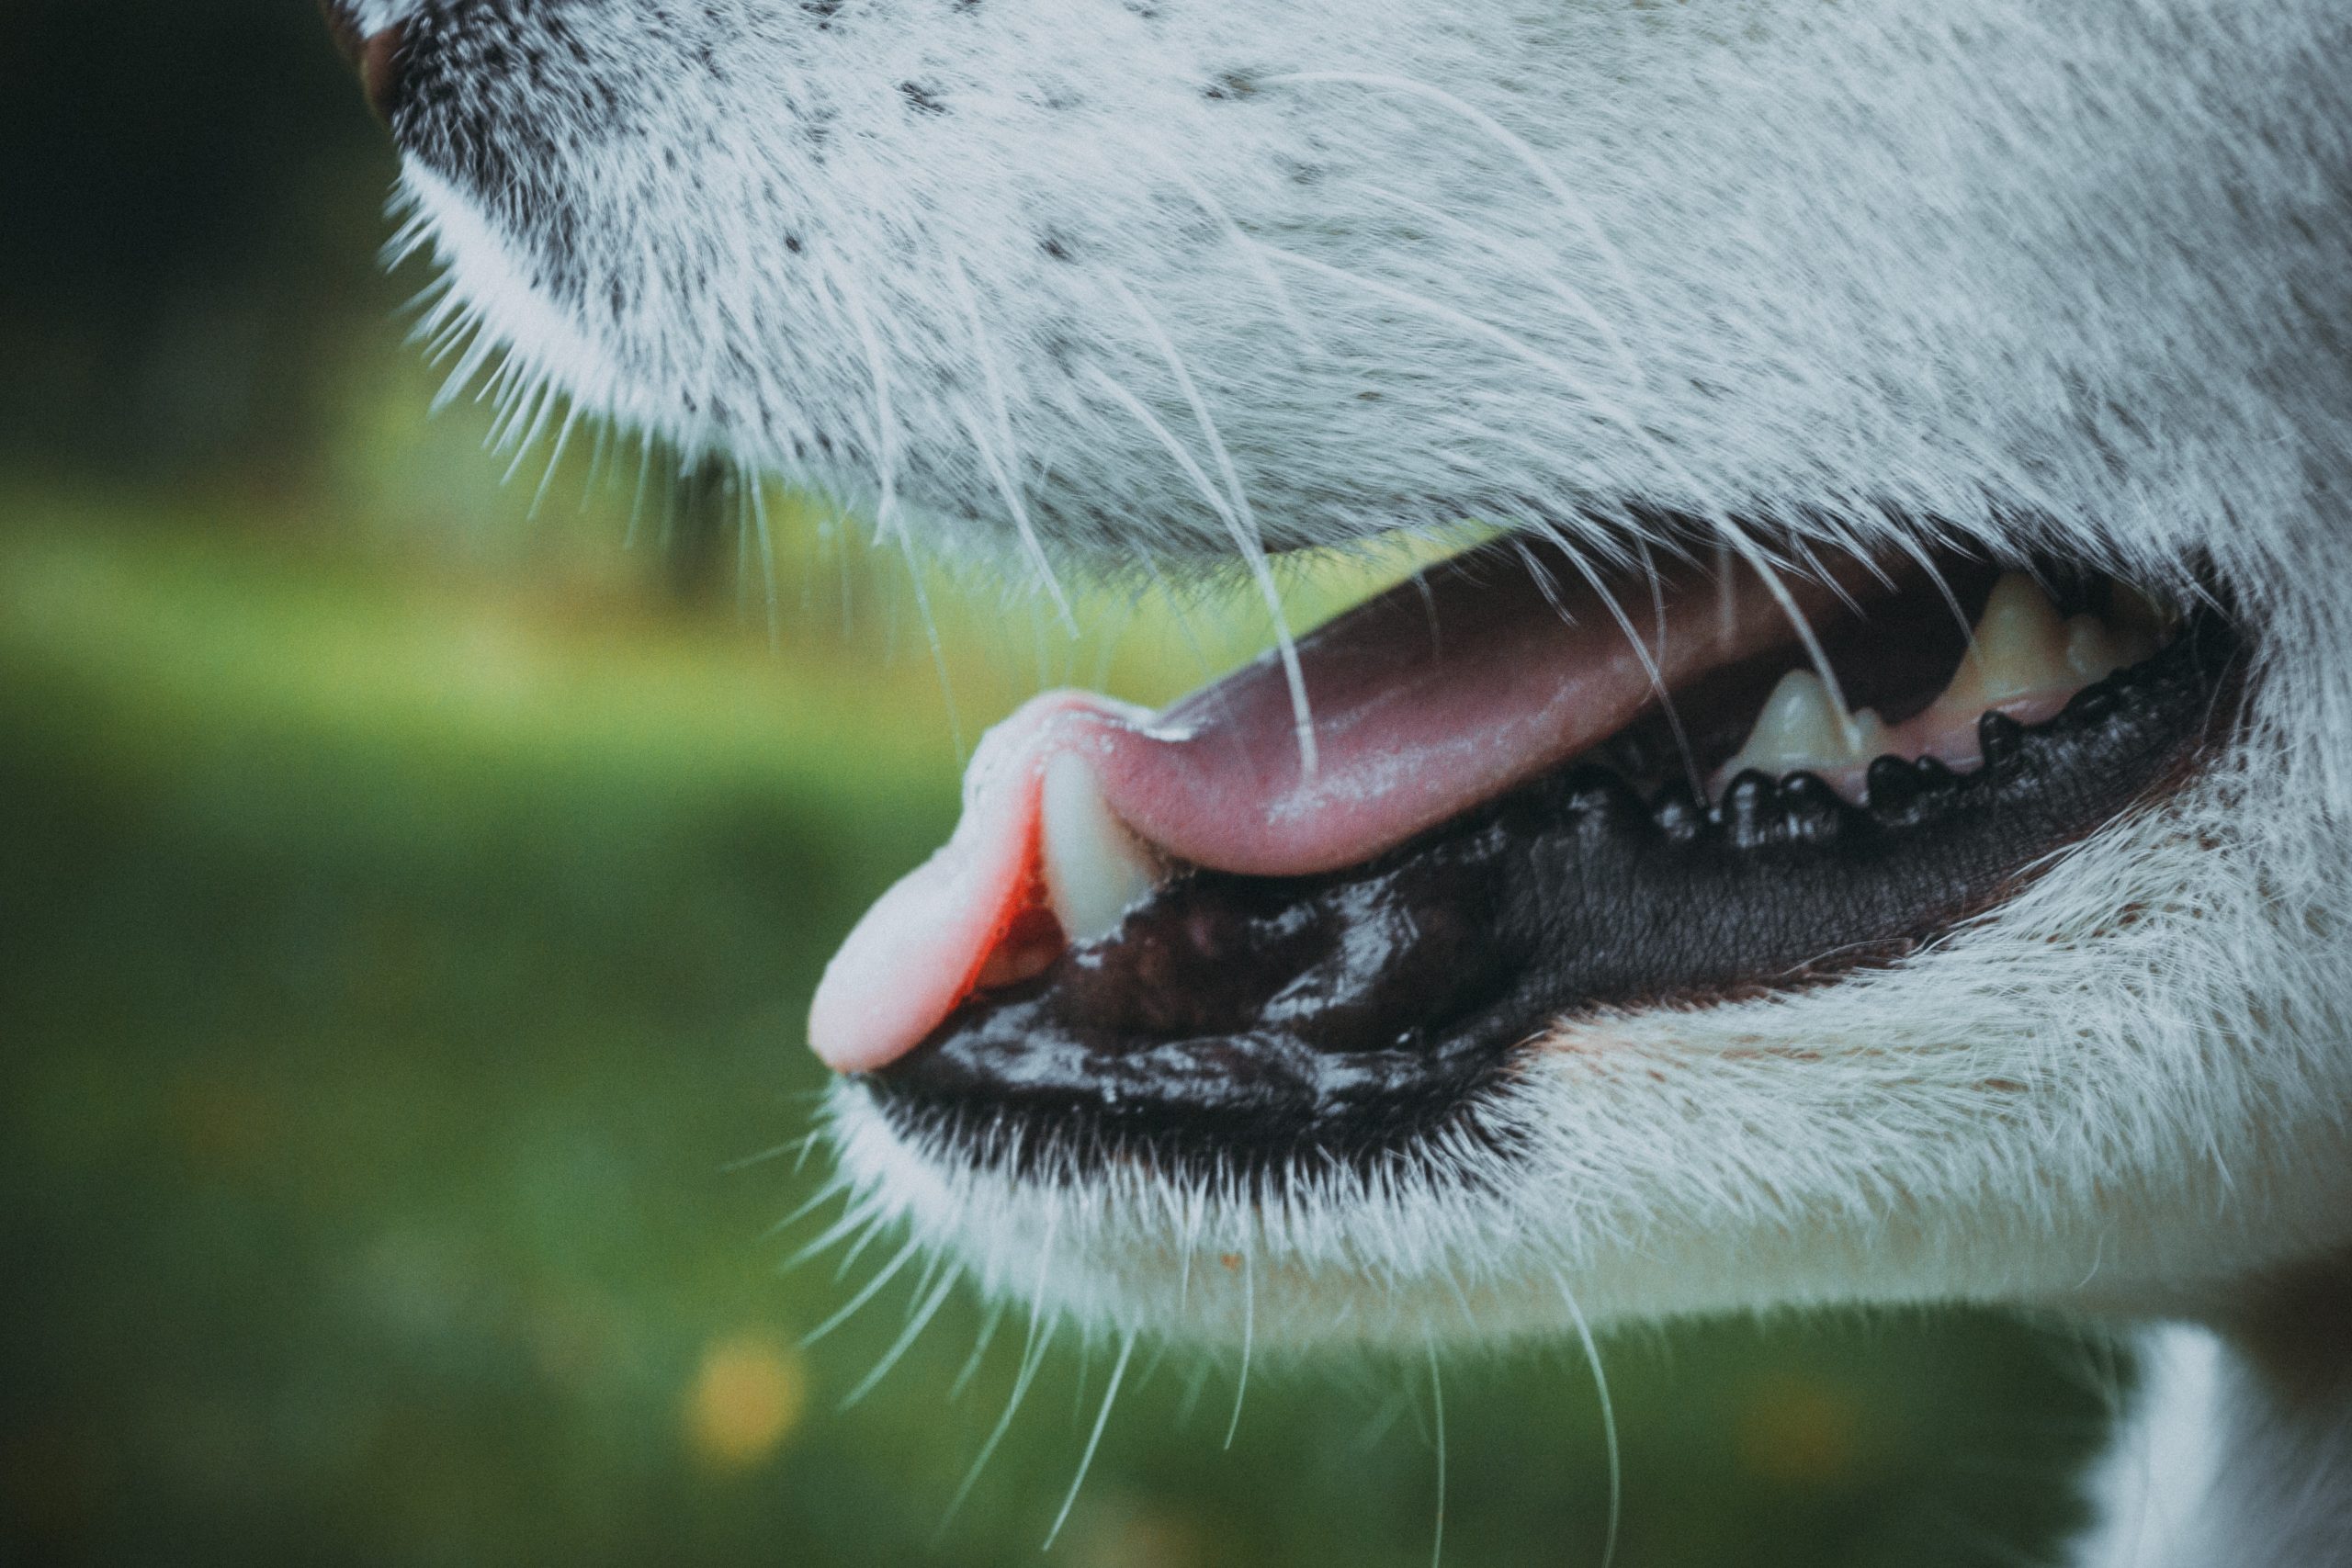 close up of a dogs mouth showing their teeth